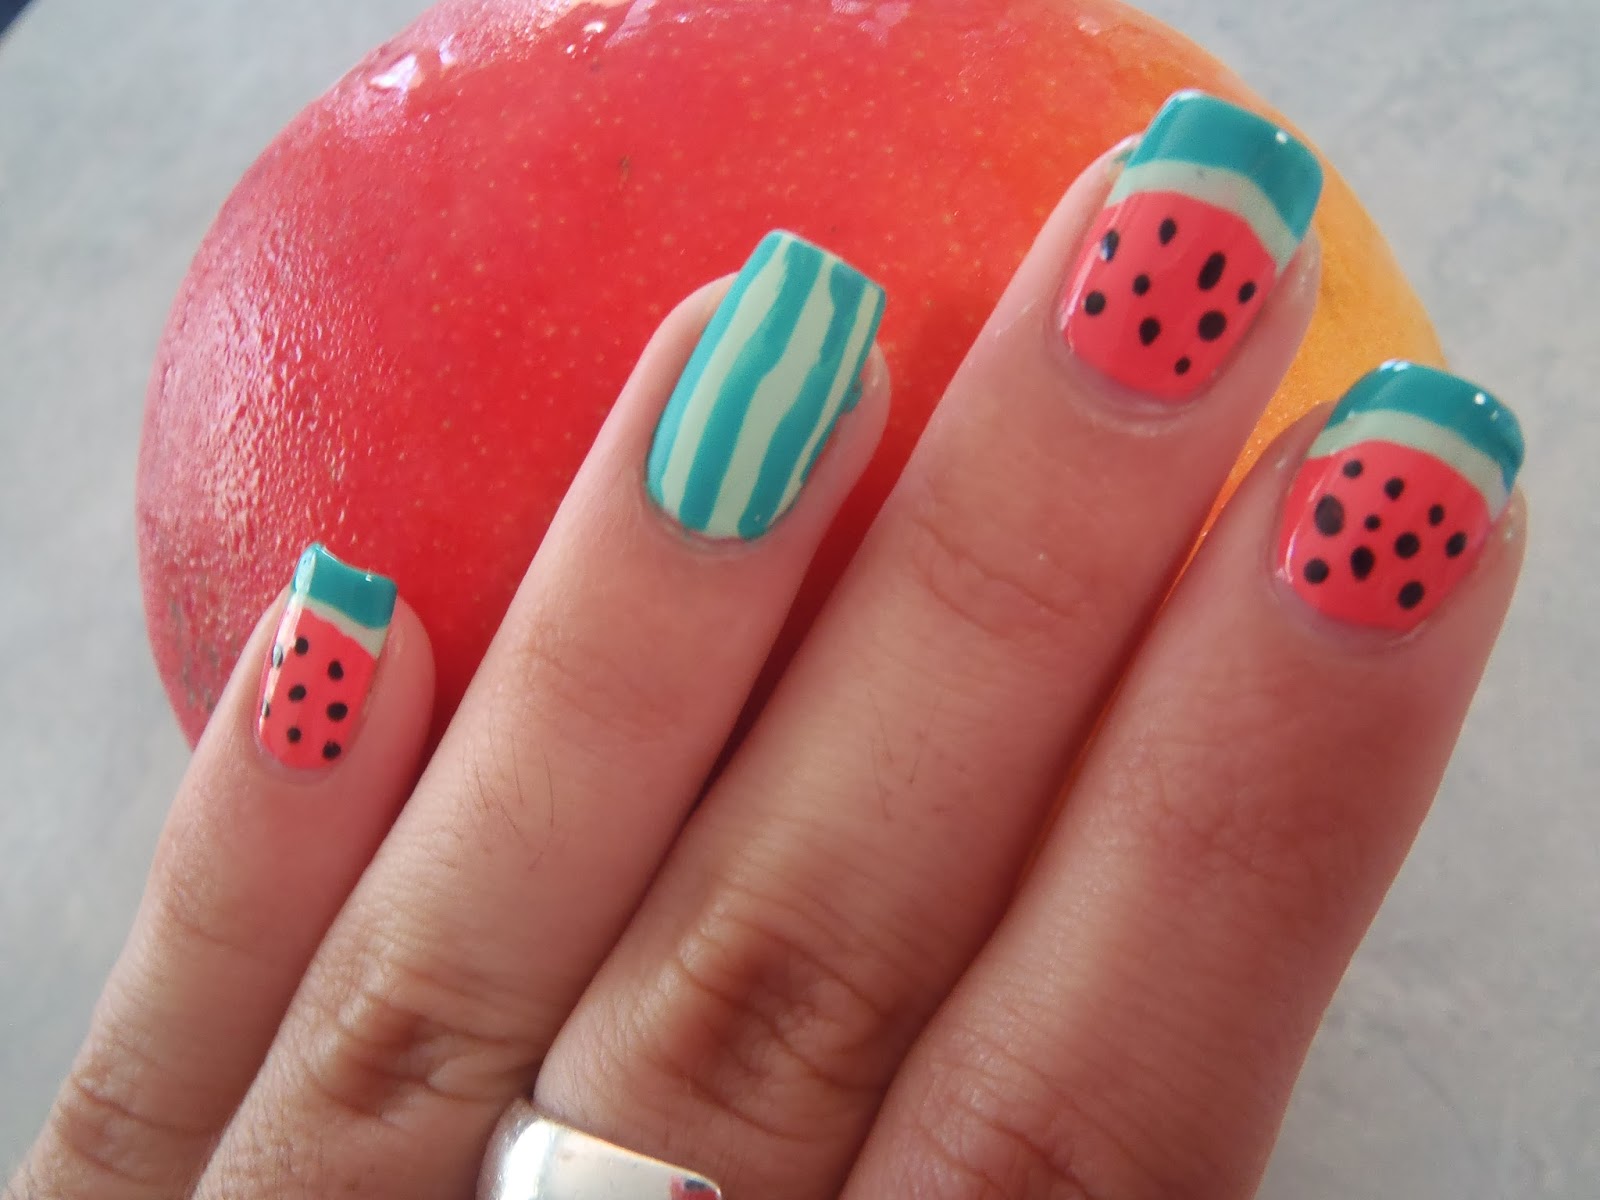 Watermelon Nail Art Designs for Short Nails - wide 5